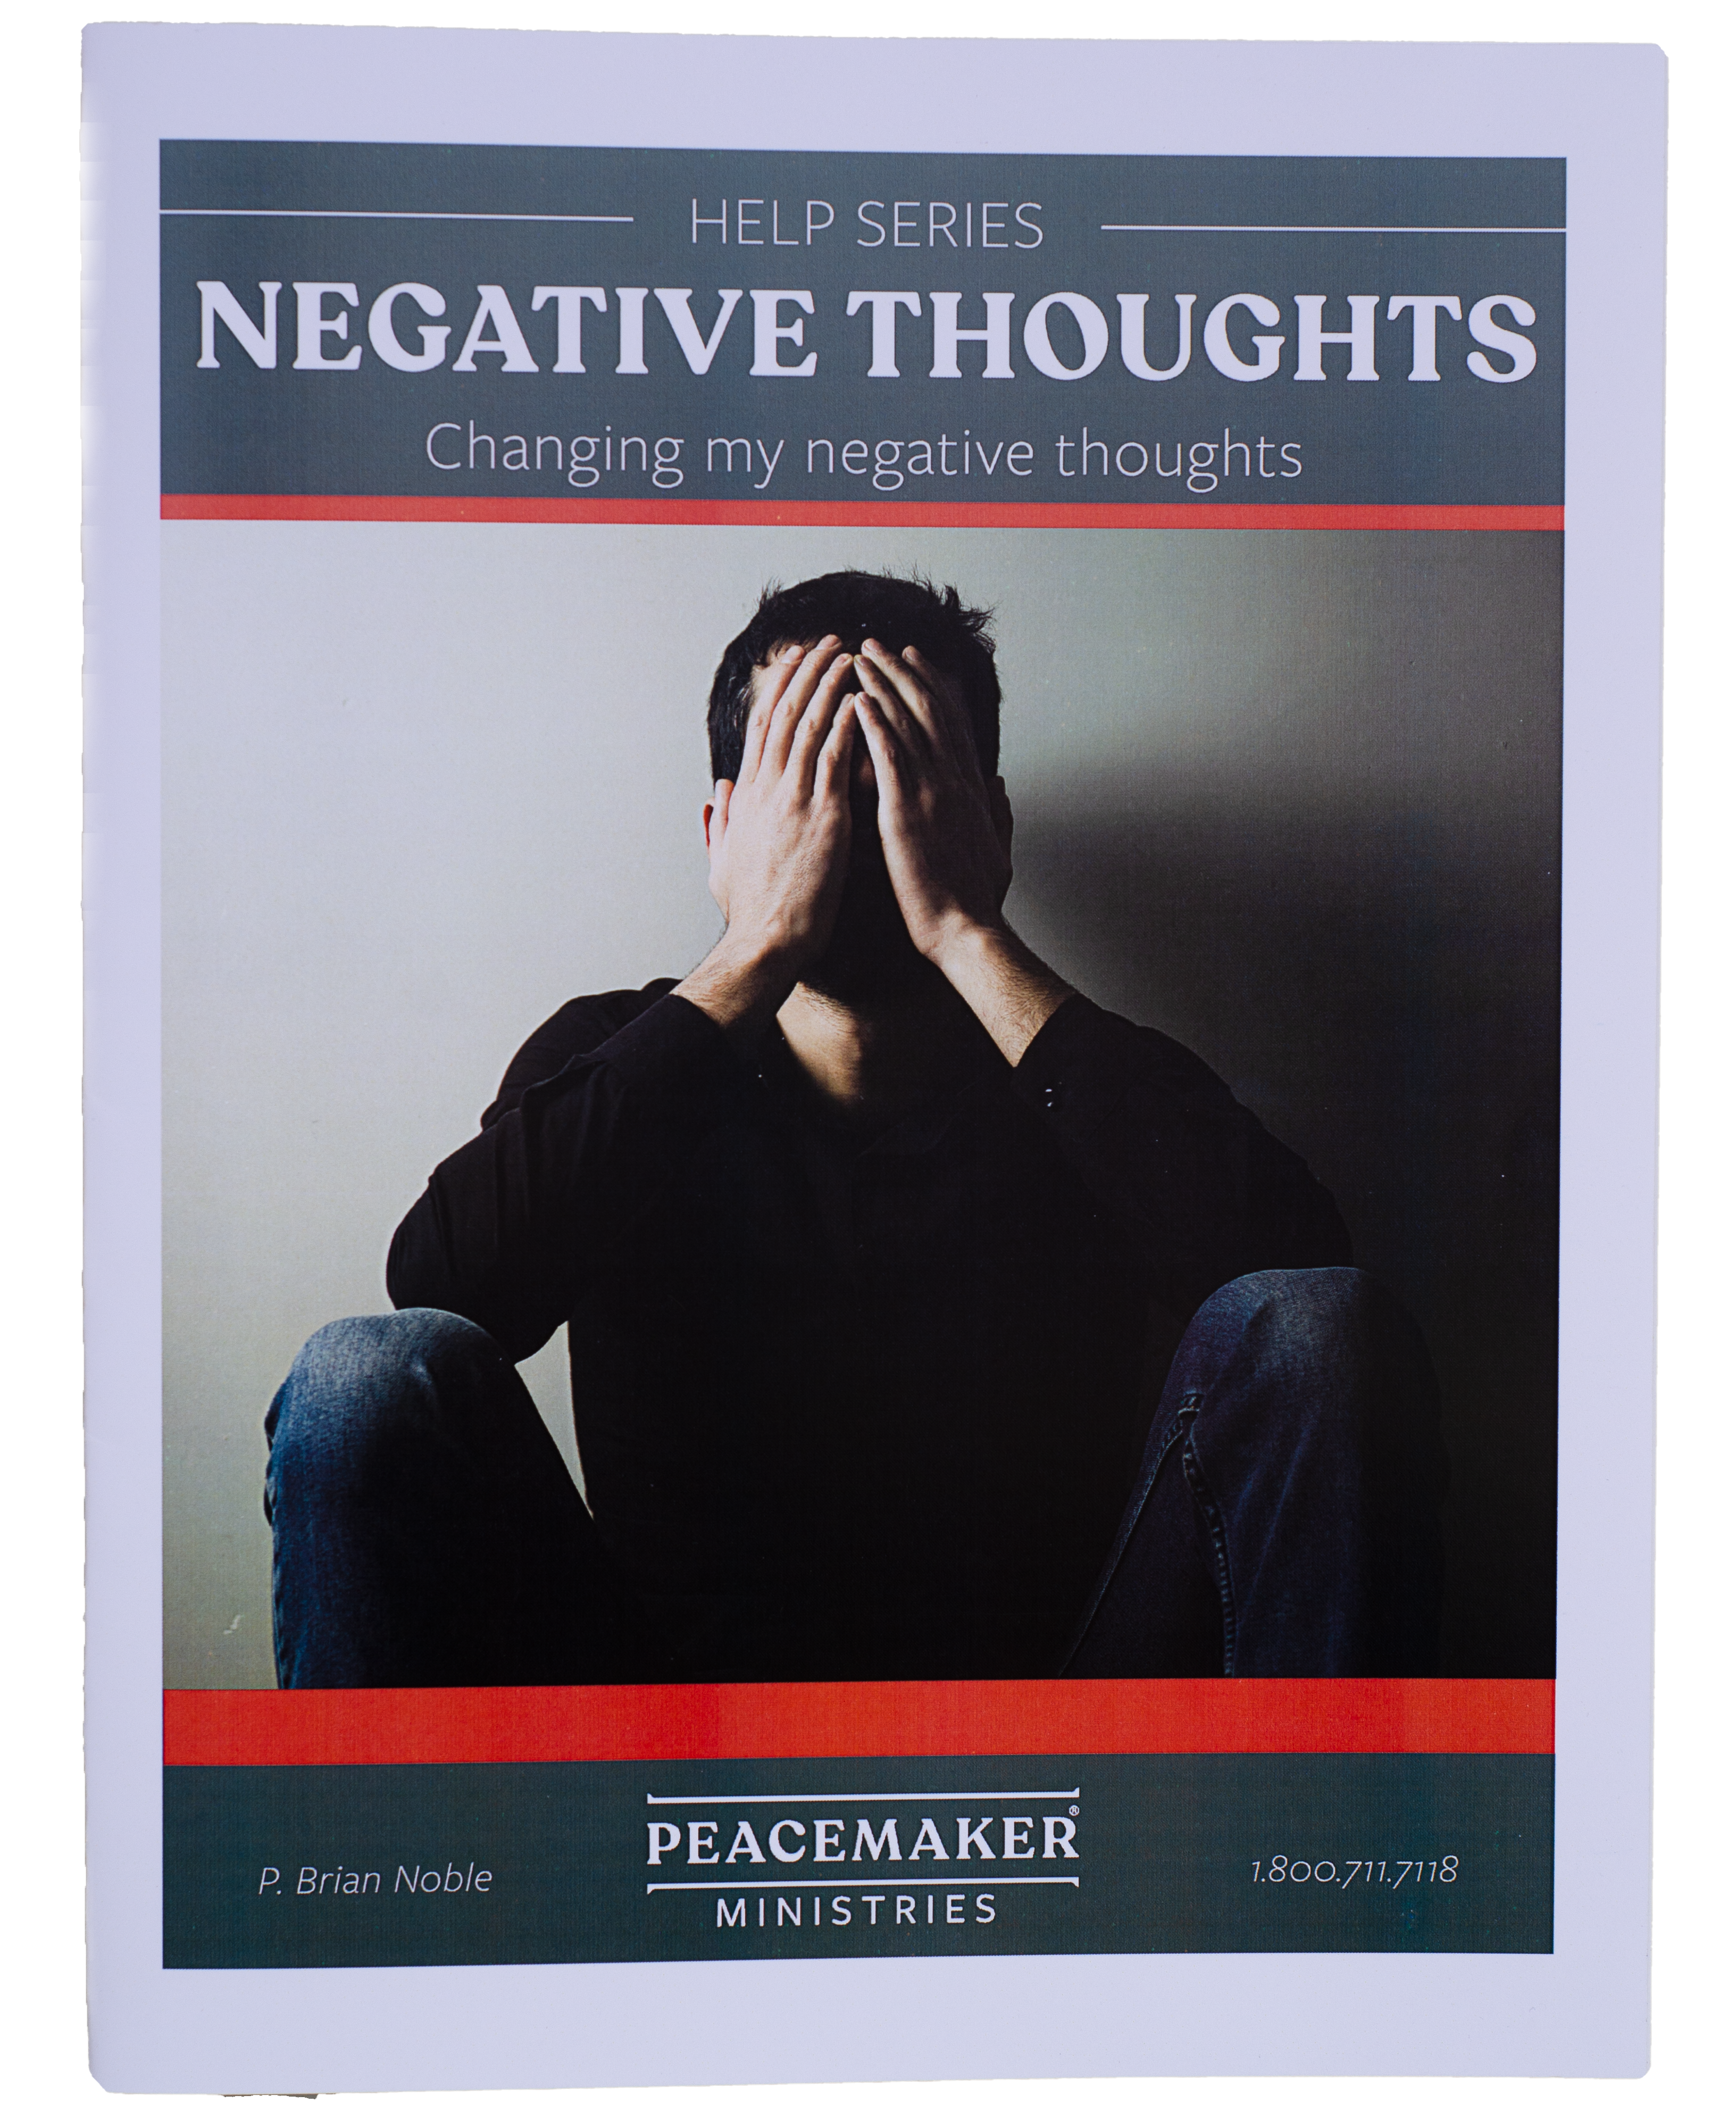 Help Series: Negative Thoughts